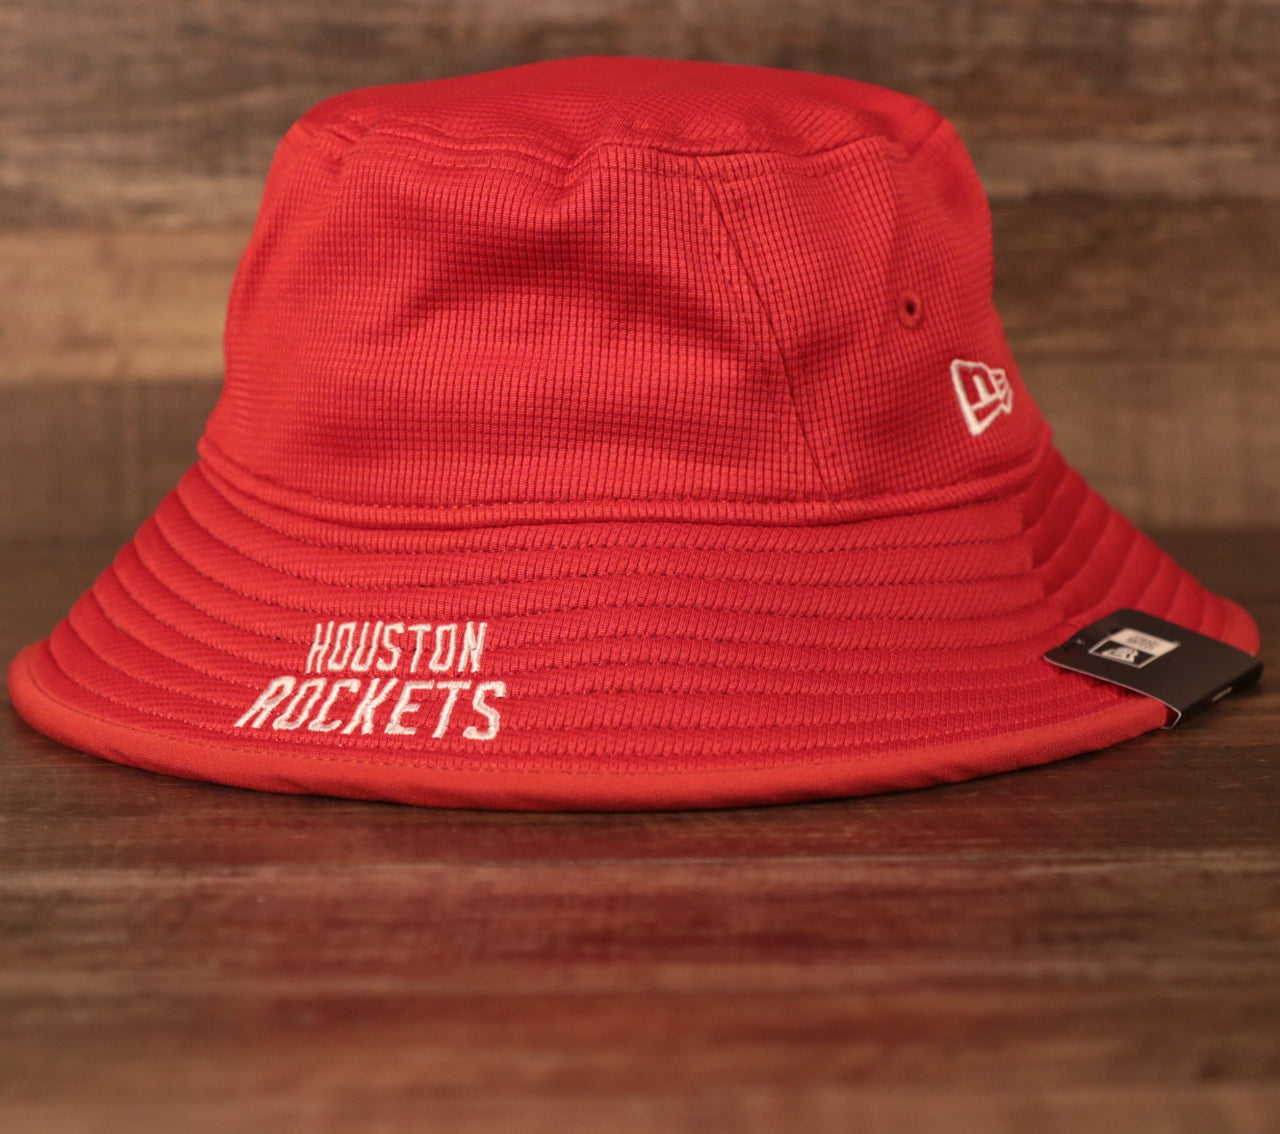 The Houston Rockets red bucket hat by New Era.